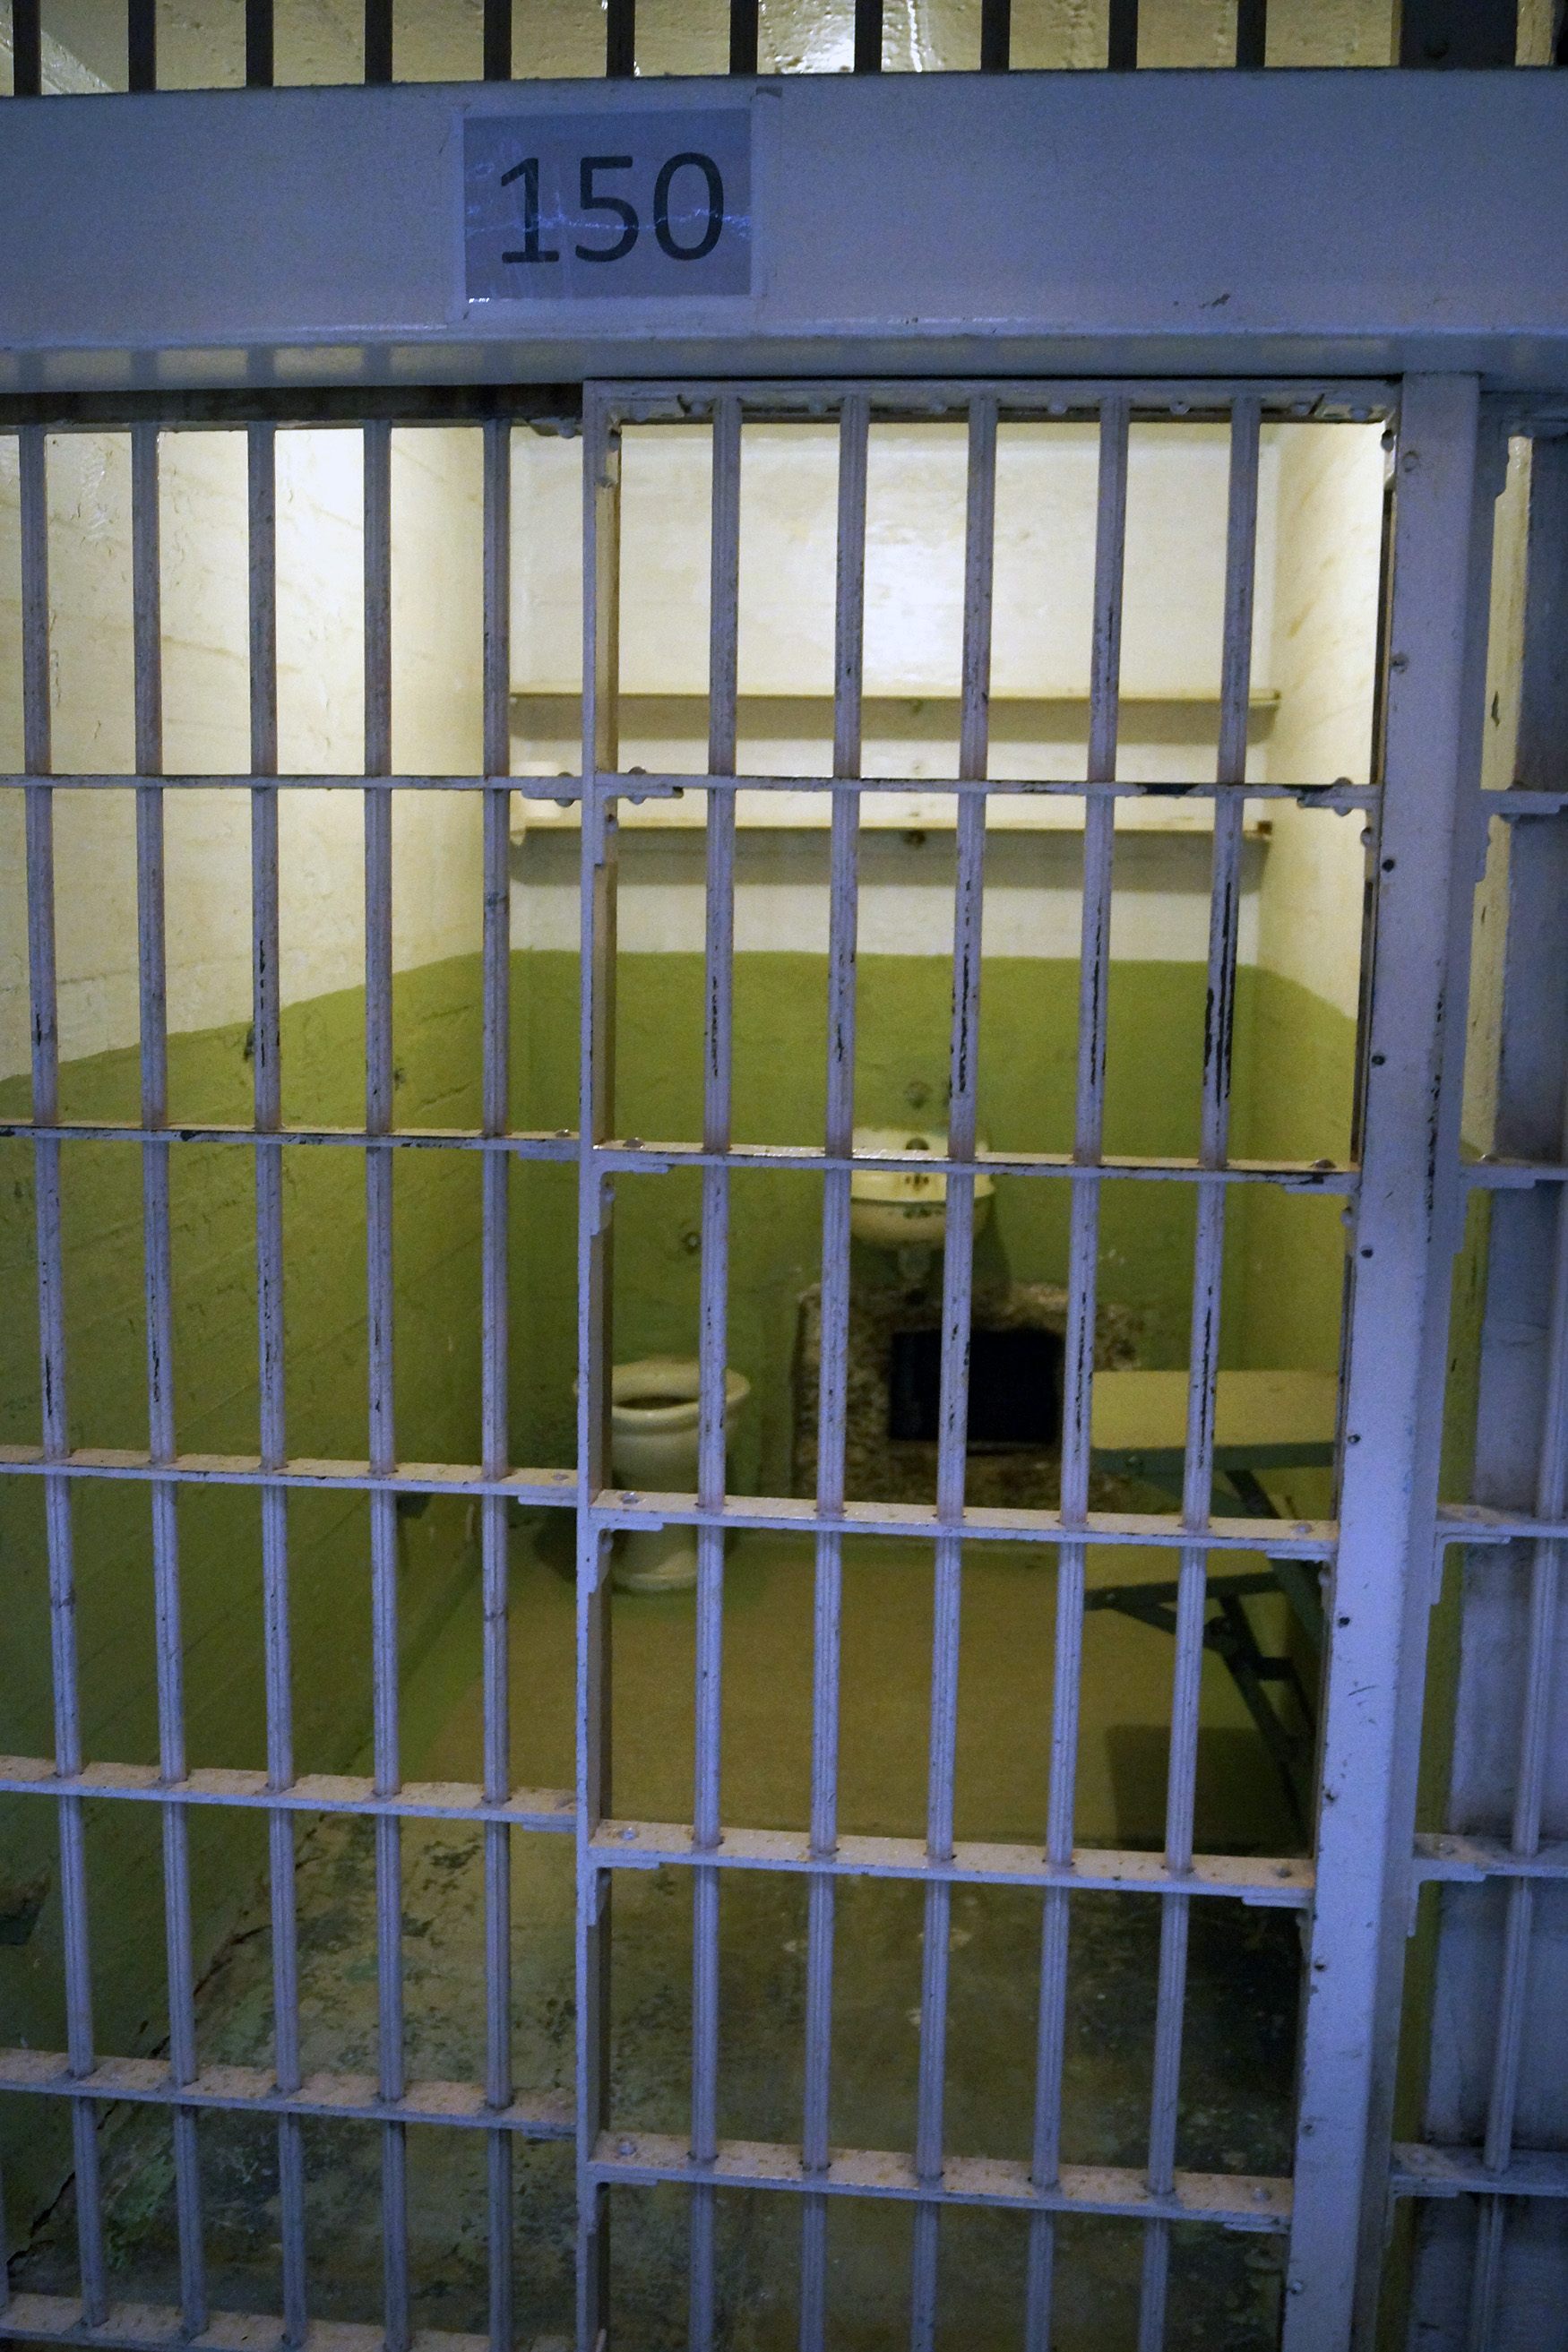 The Alcatraz cell (150) that Frank Morris or one of the Anglin brothers escaped from in 1962